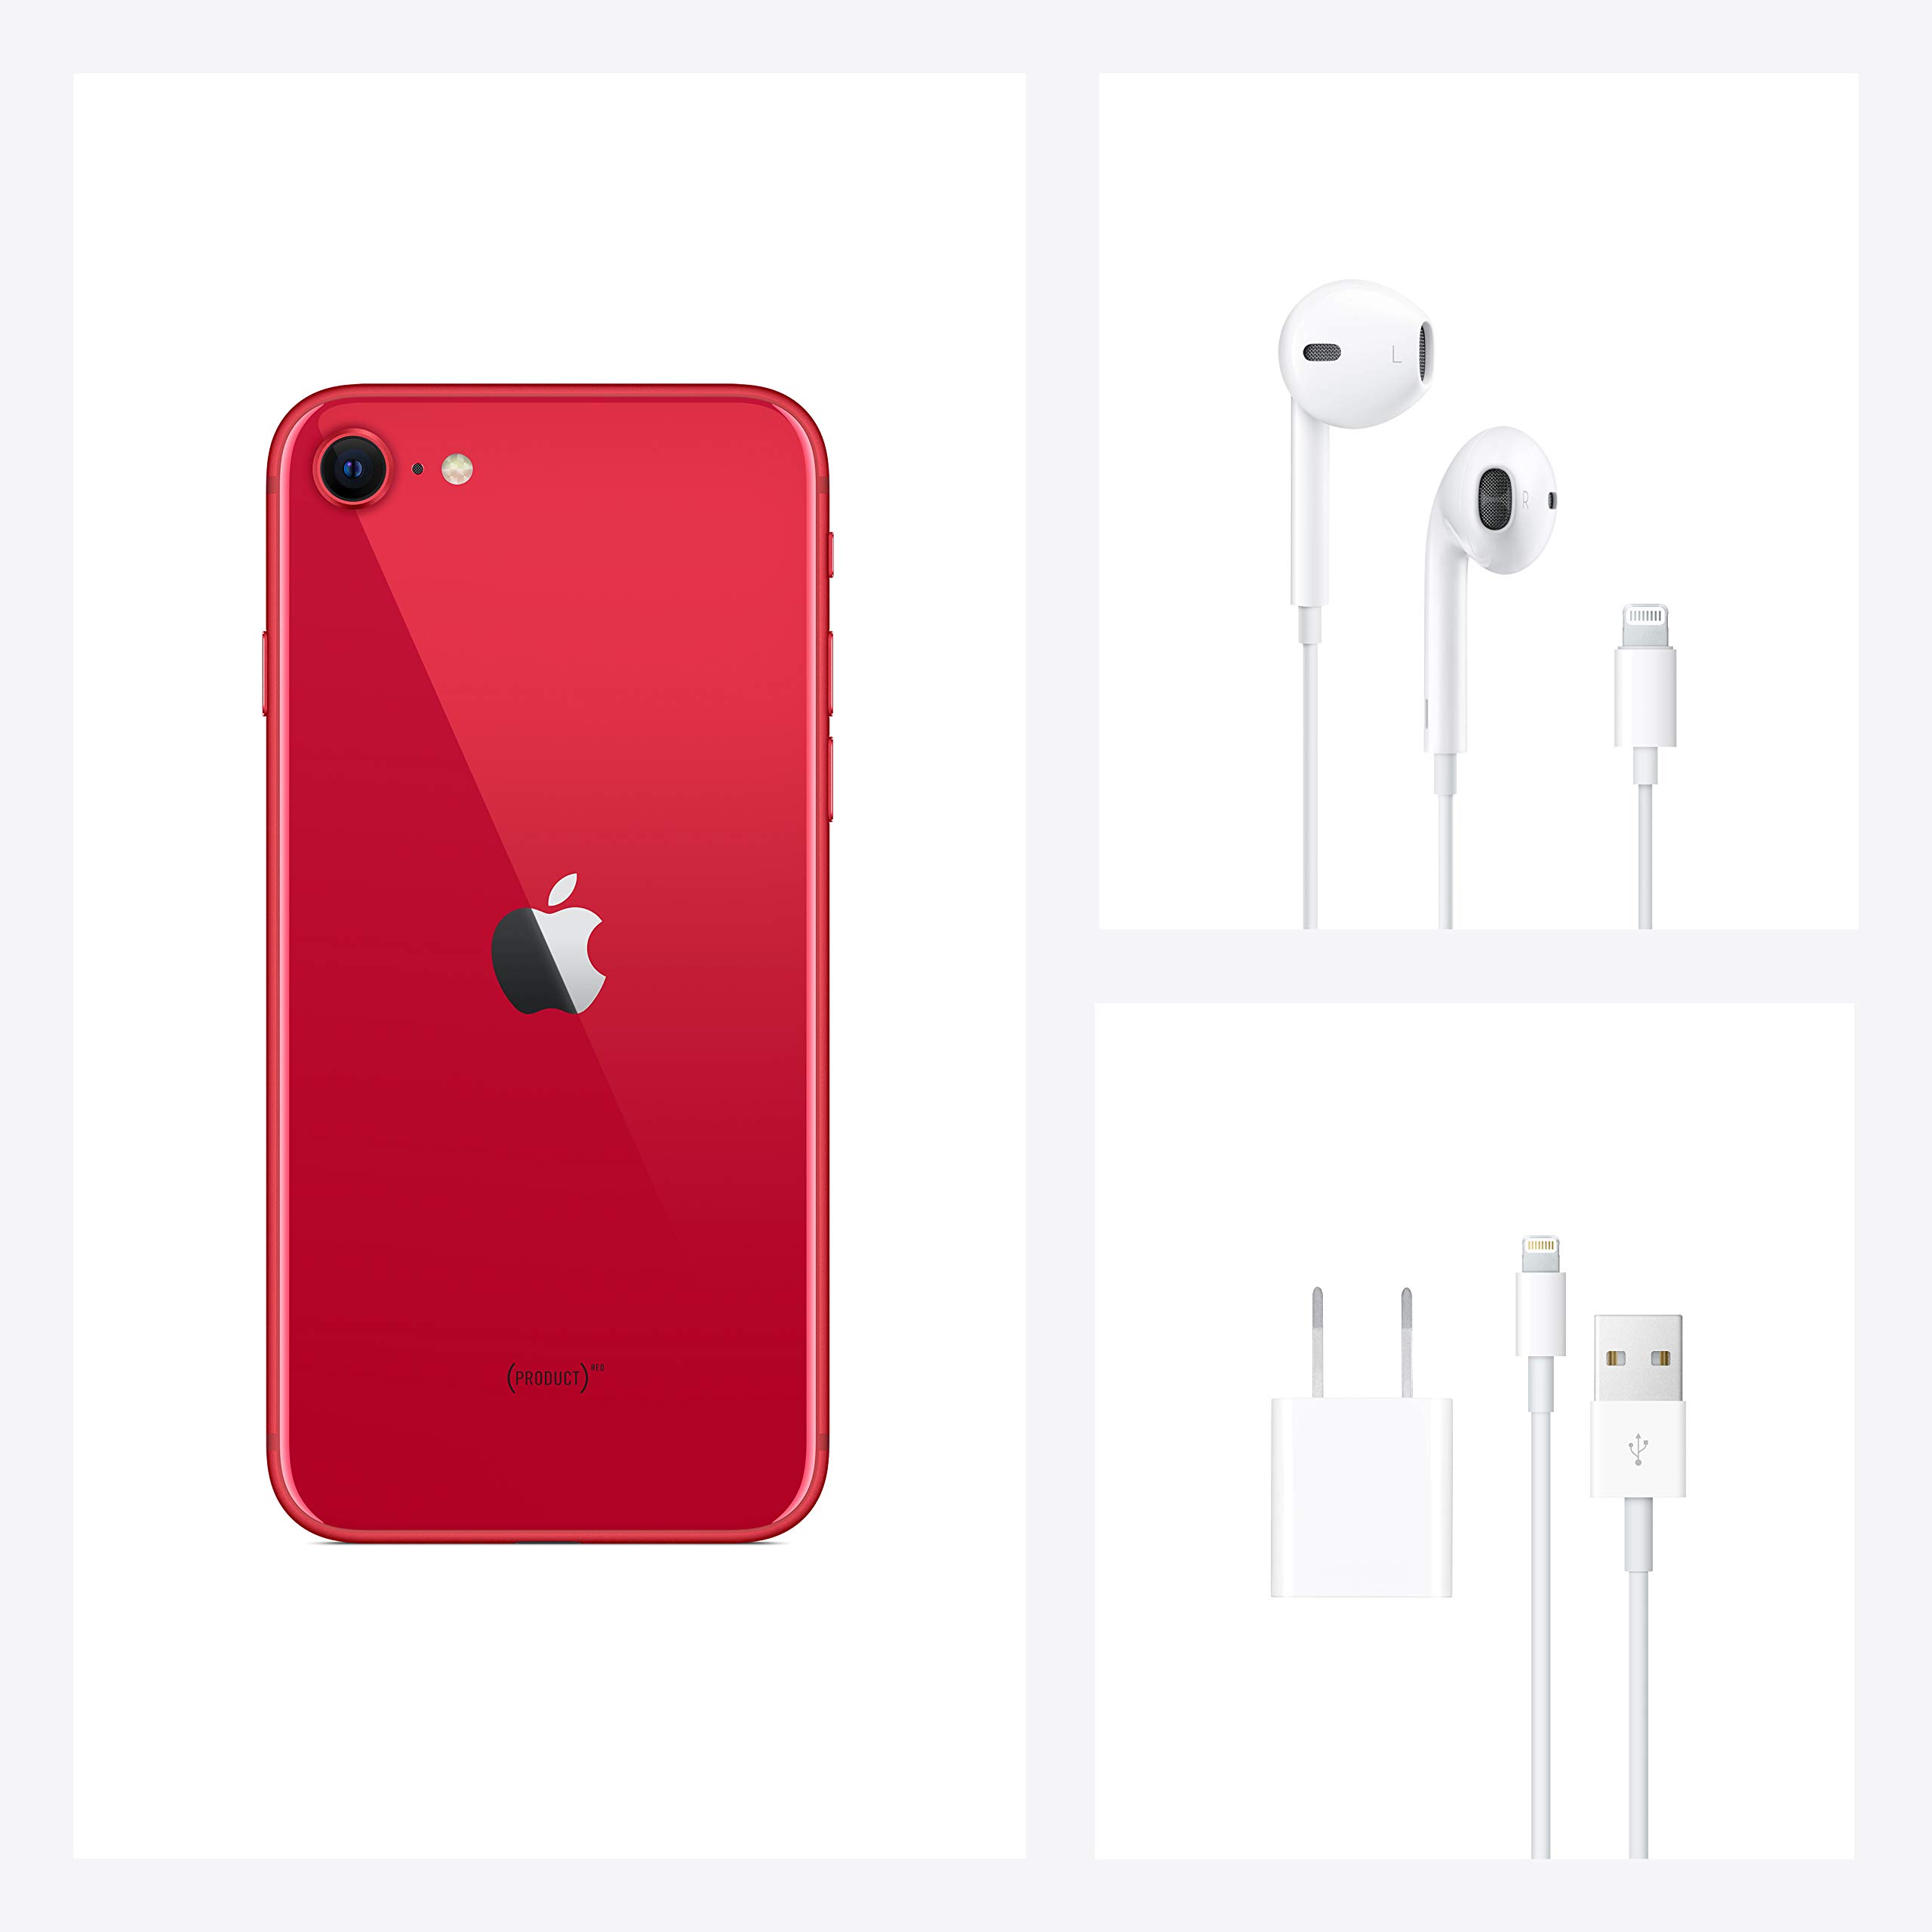 New Simple Mobile Prepaid - Apple iPhone SE (64GB) - (Product) RED [Locked to Carrier - Simple Mobile]